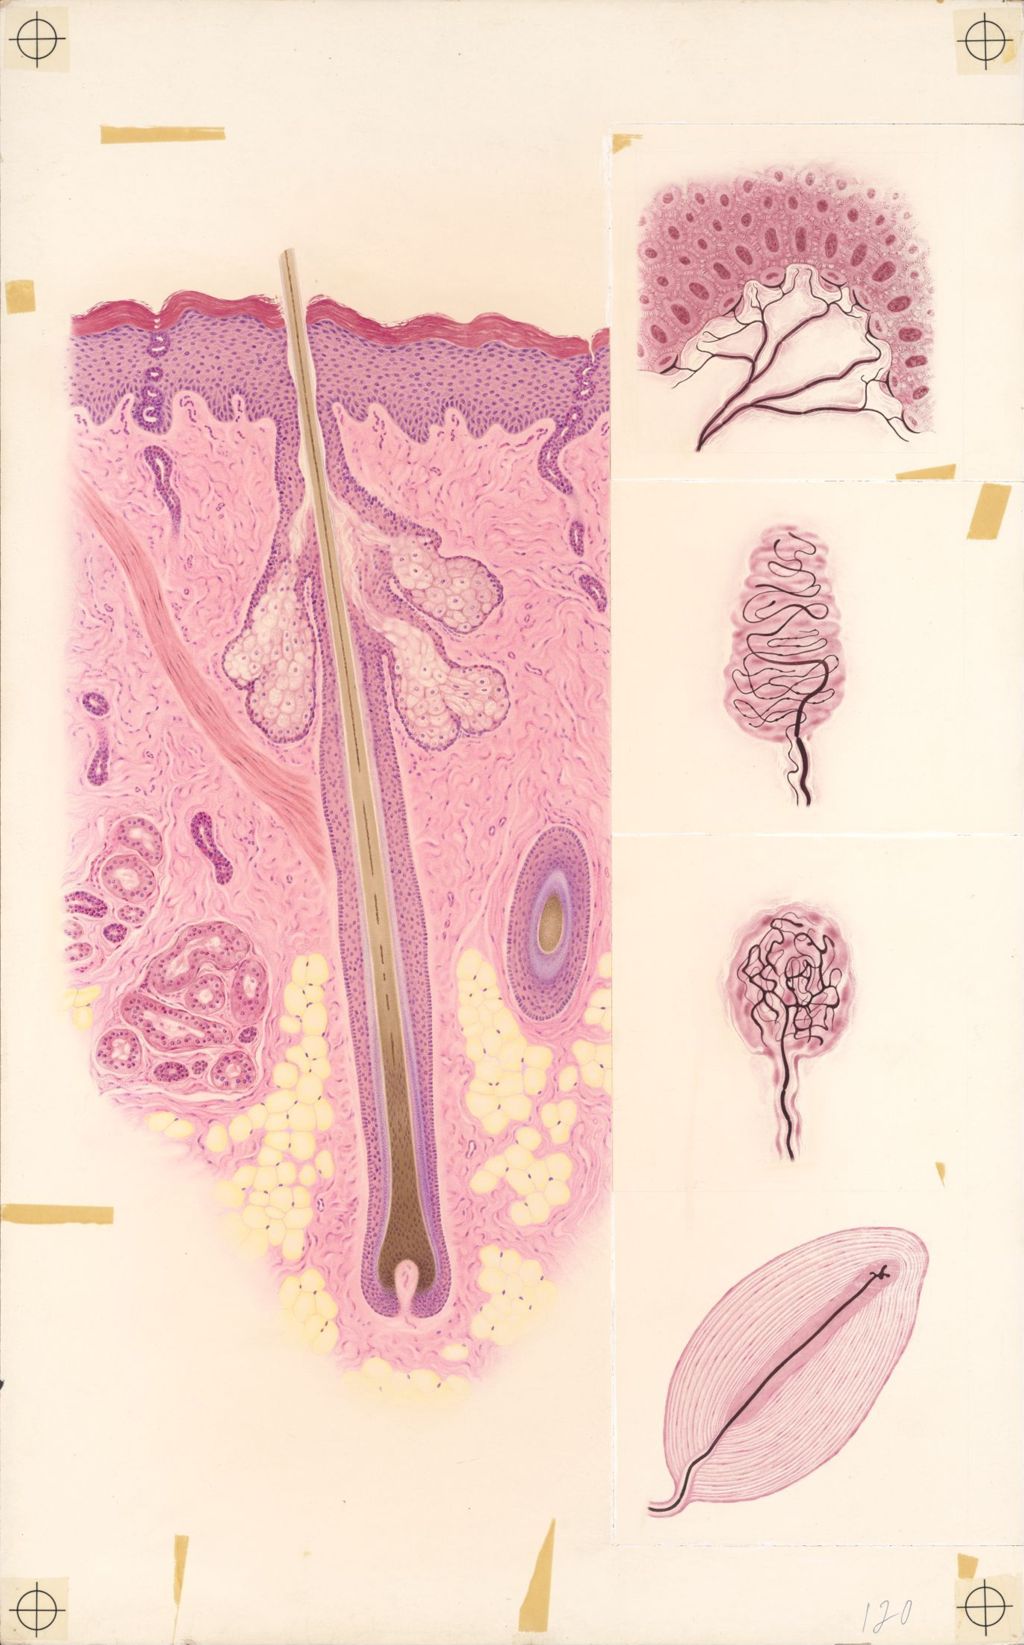 Miniature of Plate II, Schematic Representations of Microscopic Structures of the Skin, Vertical Section of Skin Showing a Hair Follicle and Adjacent Structures